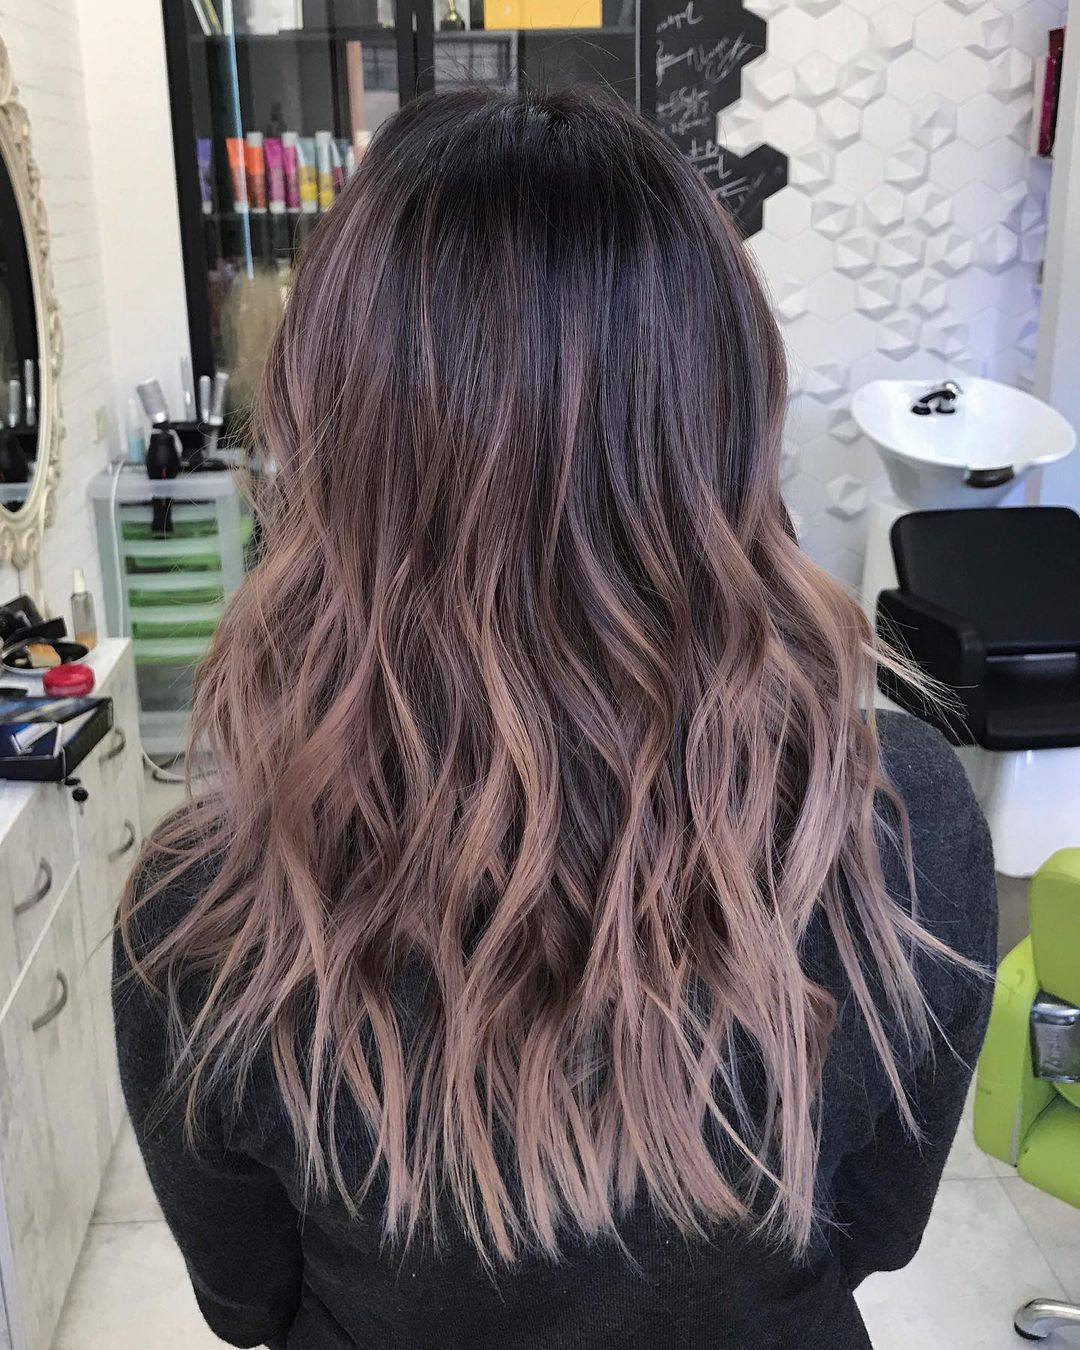 Ombre Balayage Haircut Ideas for Women - Medium and Long Hair Color Designs 2021 - 2022